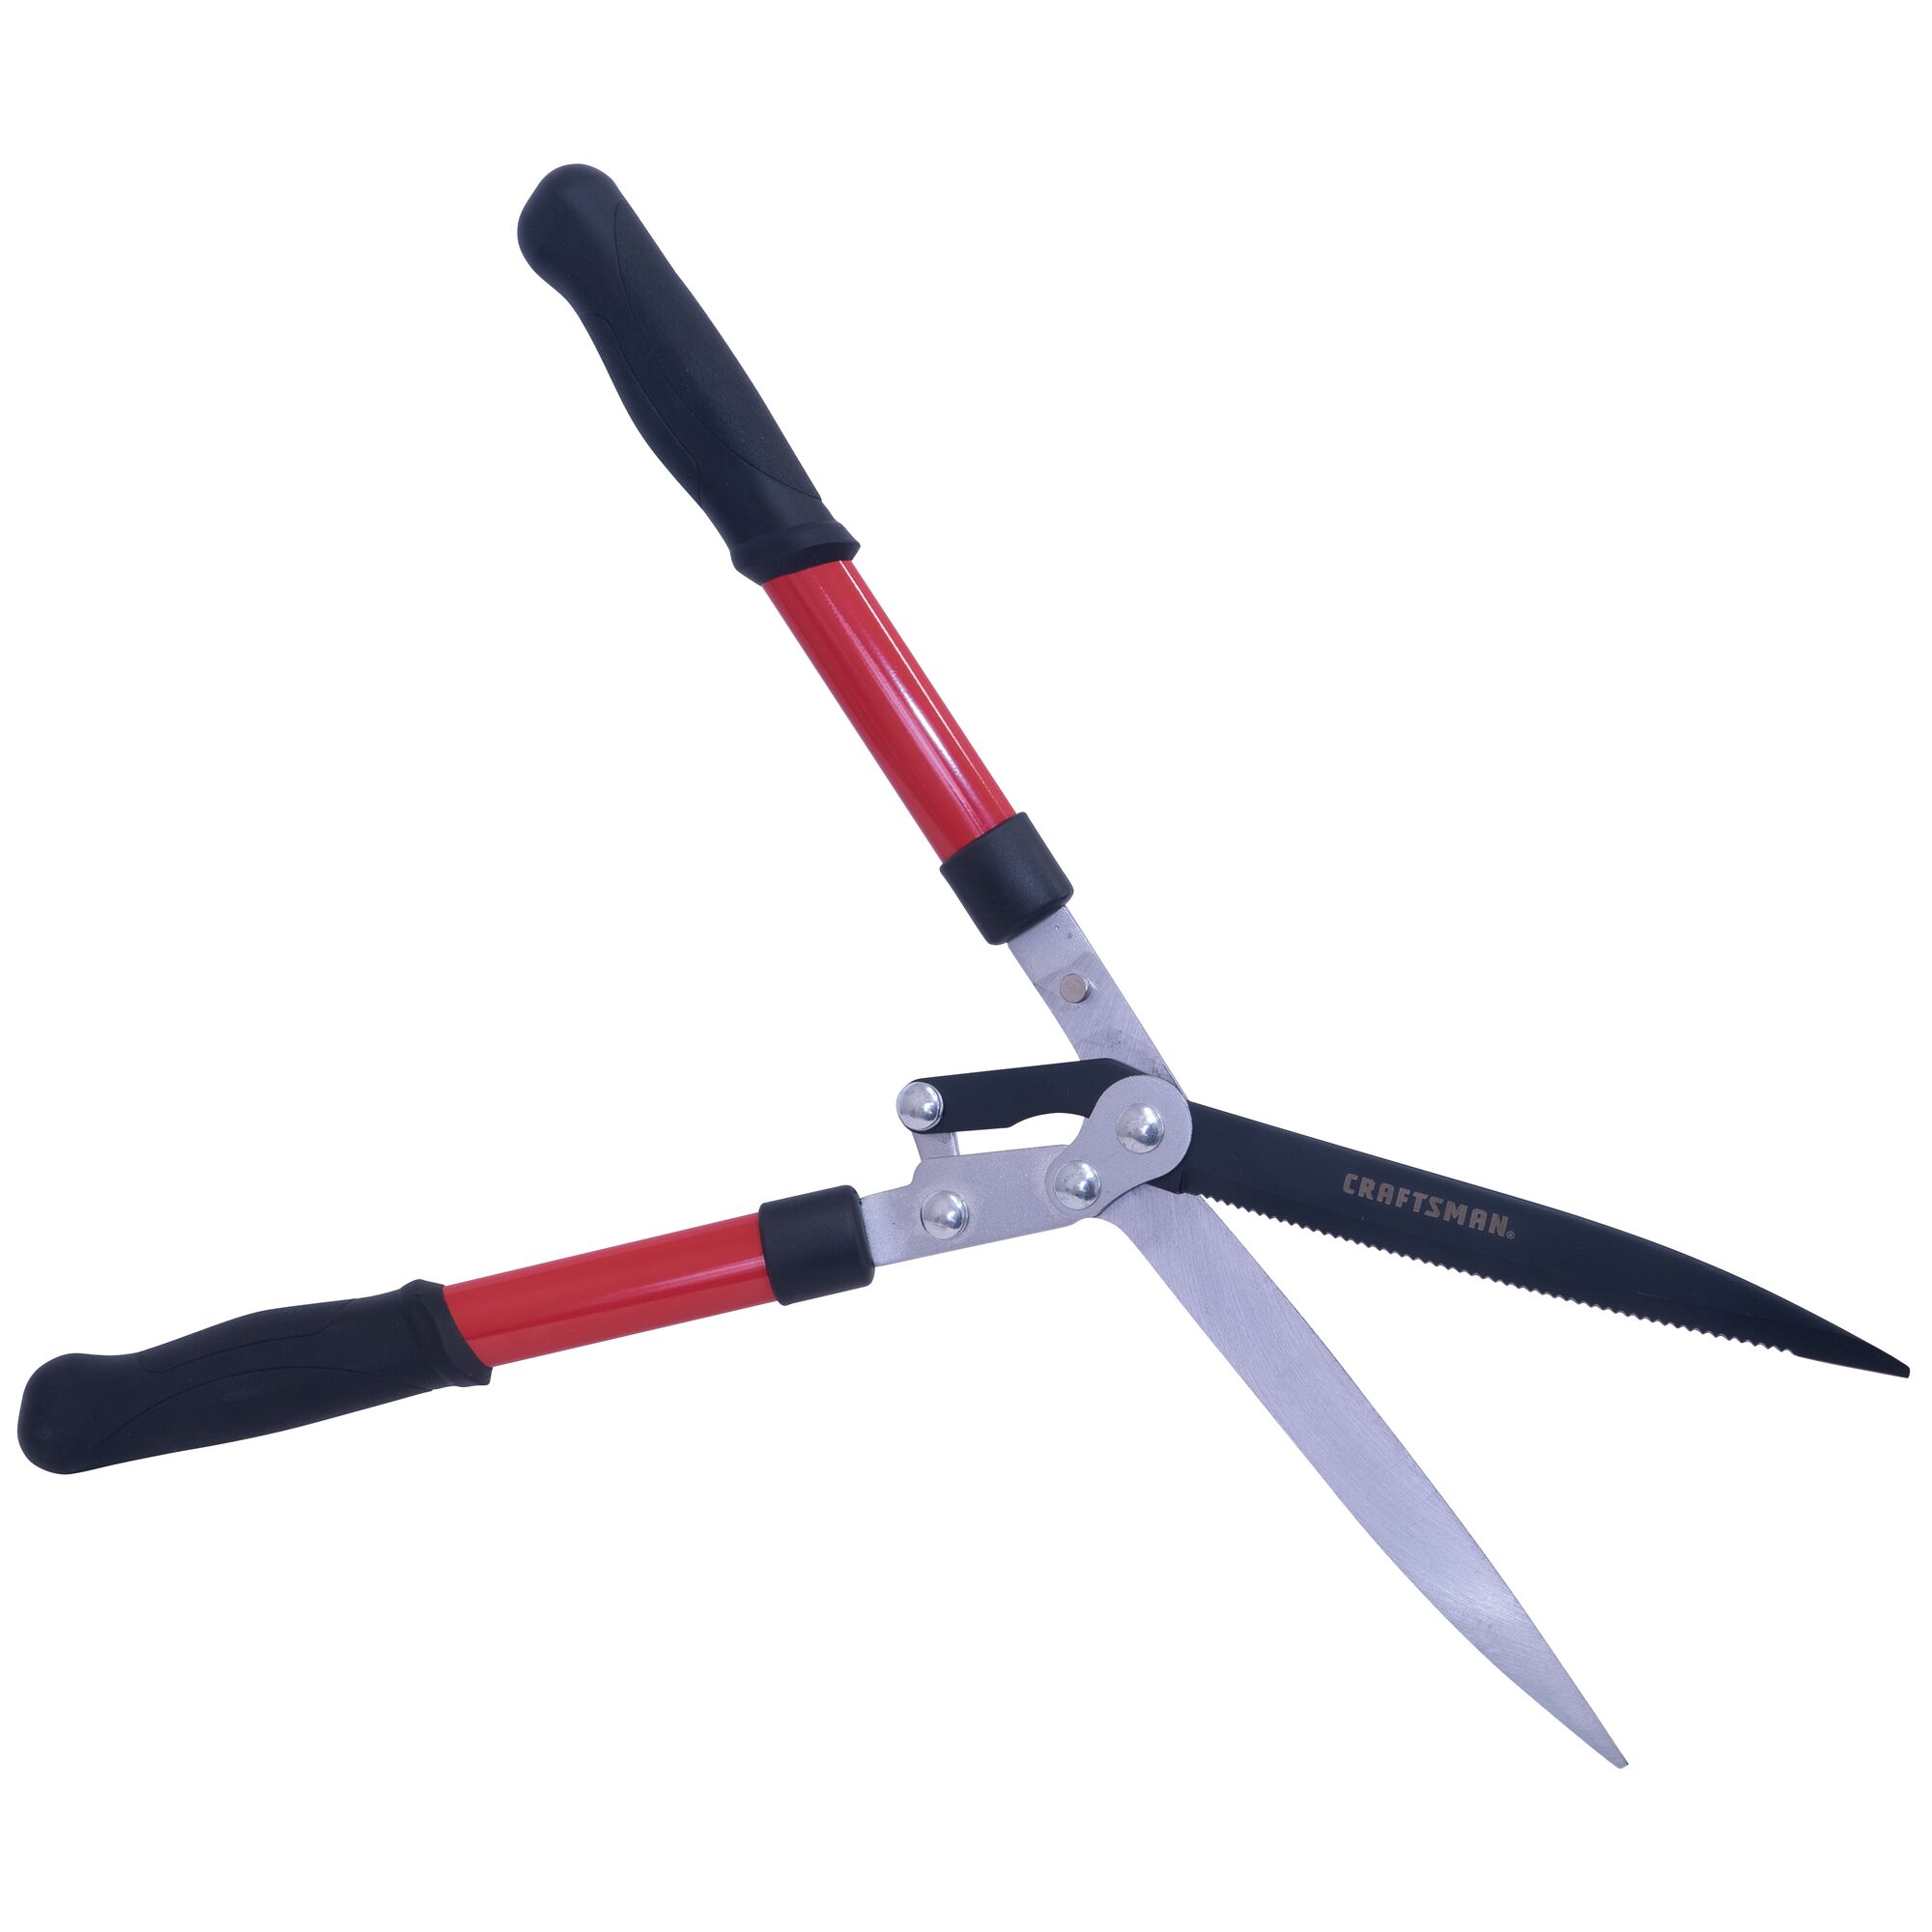 Hedge shears with compound action blade.